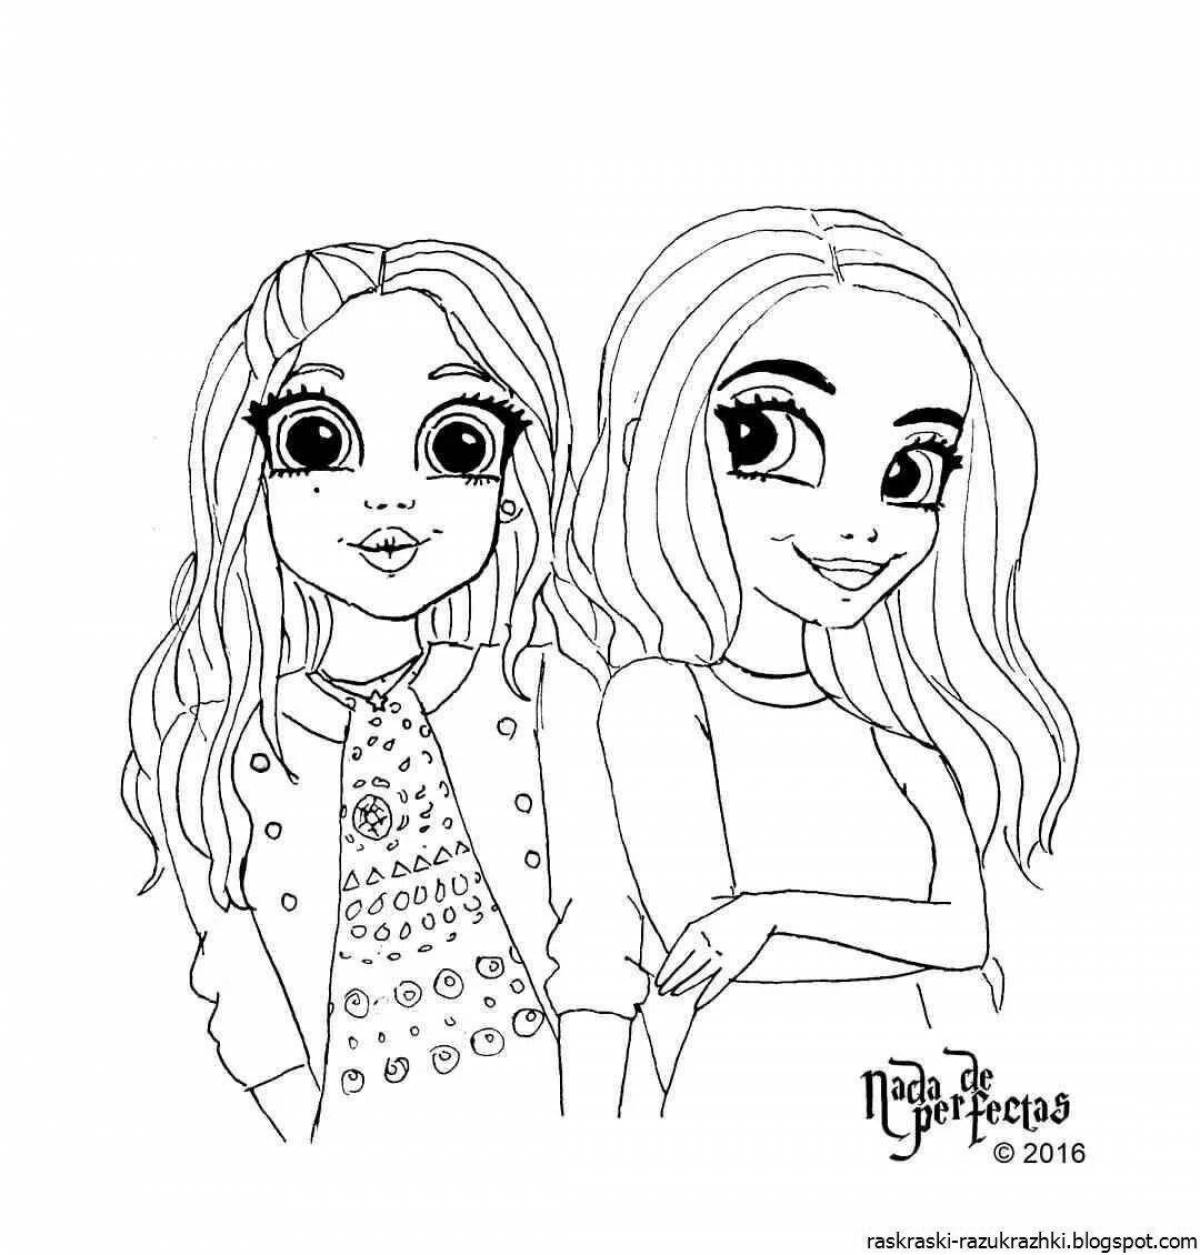 Funny lp girls coloring page